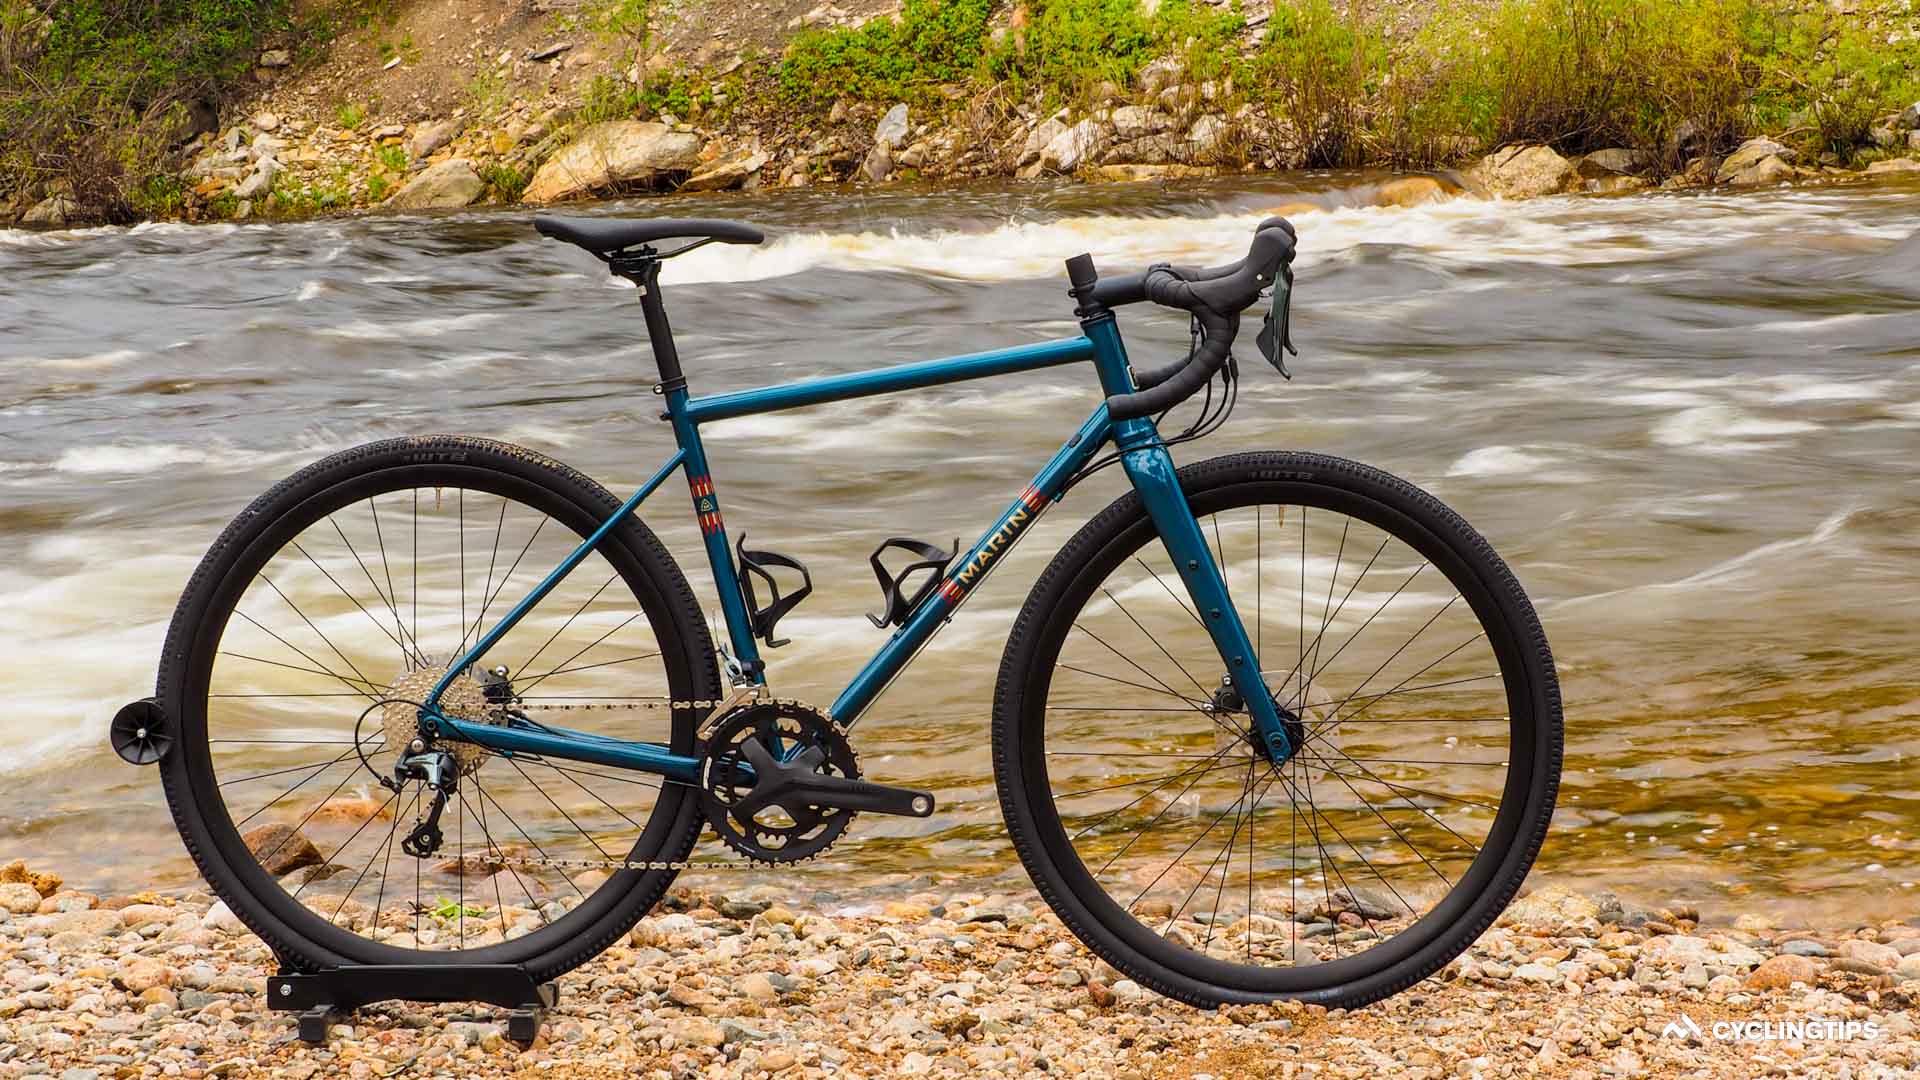 2022 Marin Nicasio 2 gravel bike review Sometimes vanilla is just right